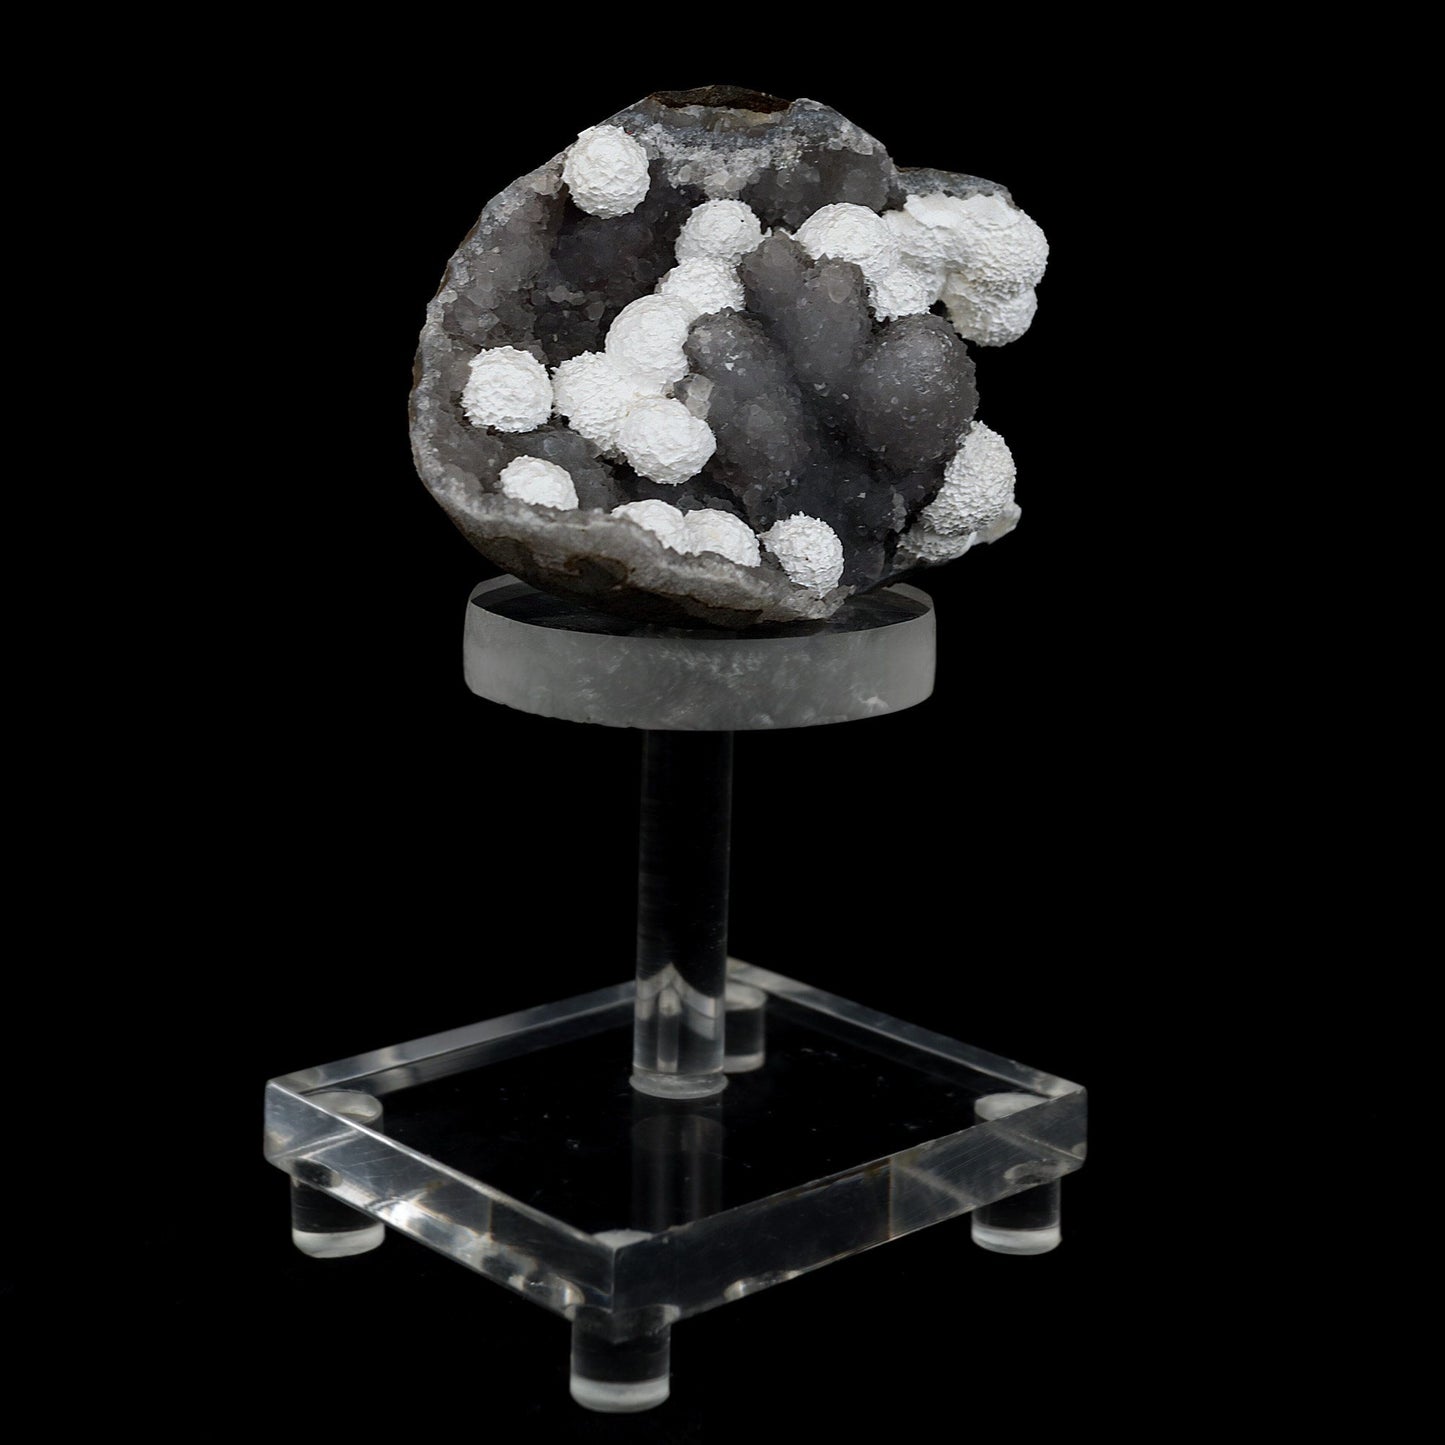 Okenite Balls on MM Quartz Natural Mineral Specimen # B 4439  https://www.superbminerals.us/products/okenite-balls-on-mm-quartz-natural-mineral-specimen-b-4439  Features: Beautiful snow-white puff balls of needle Okenite are scattered over all, In this stunning cavernous Chalcedony matrix. Such outstanding Okenite specimens. Primary Mineral(s): OkeniteSecondary Mineral(s): N/AMatrix: MM Quartz11 cm x 7 cm x 7 cmWeight : 310 Gms Locality: Mumbai, Maharashtra, 